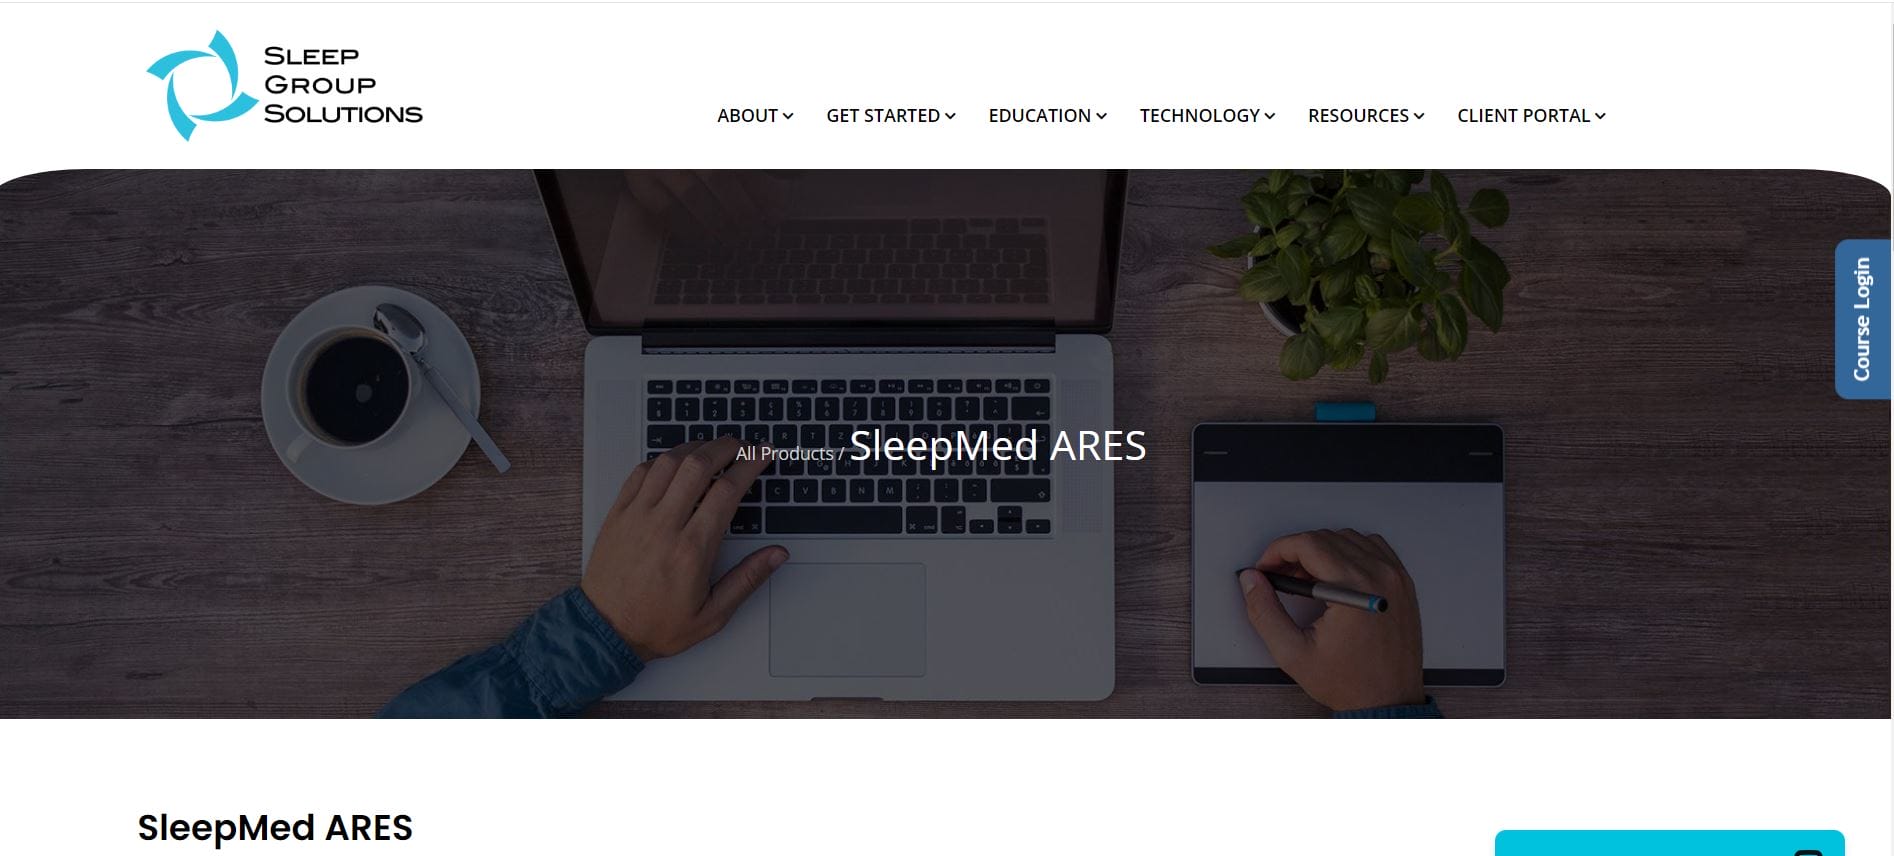 A person typing on a laptop with a cup of coffee and a notepad on the desk. The screen displays the text "SleepMed ARES" along with a pricing guide. The Sleep Group Solutions logo is in the upper left corner.